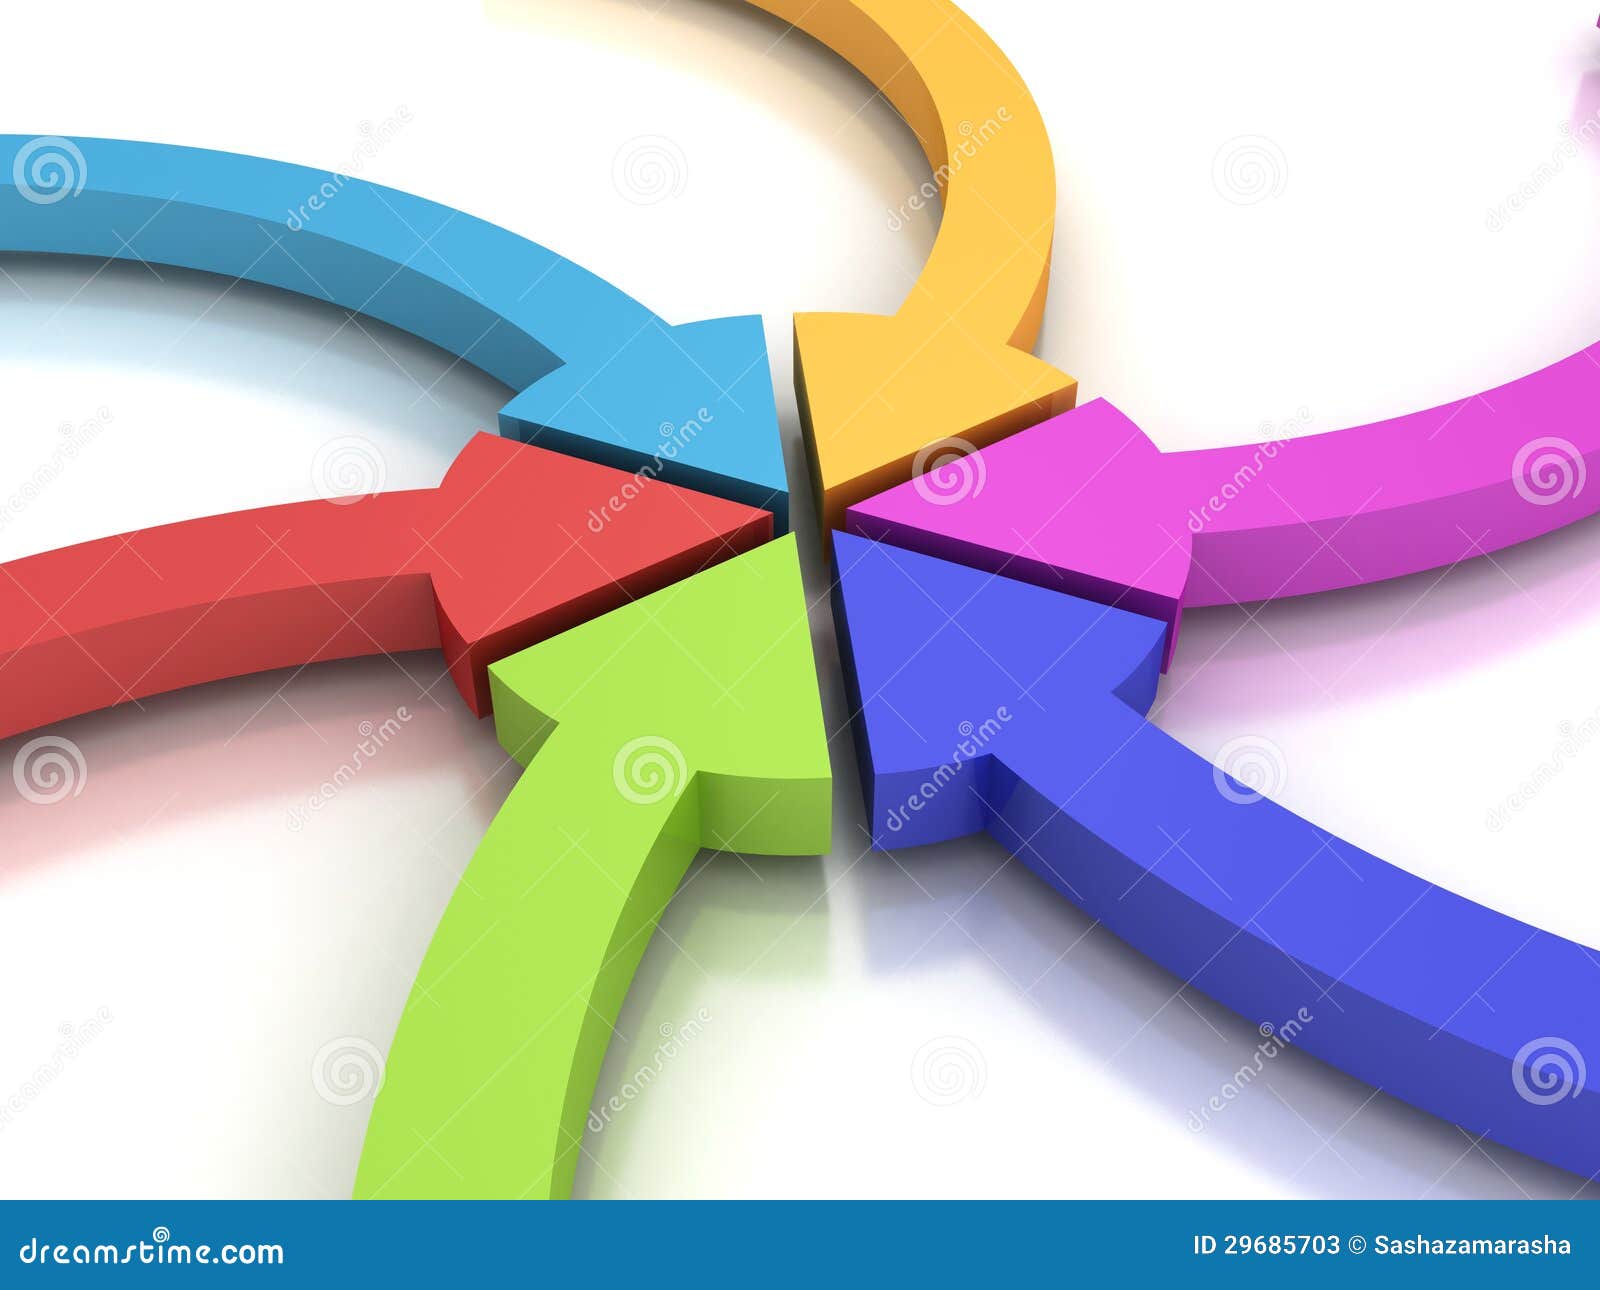 colorful curving arrows sweep inward to point at the center